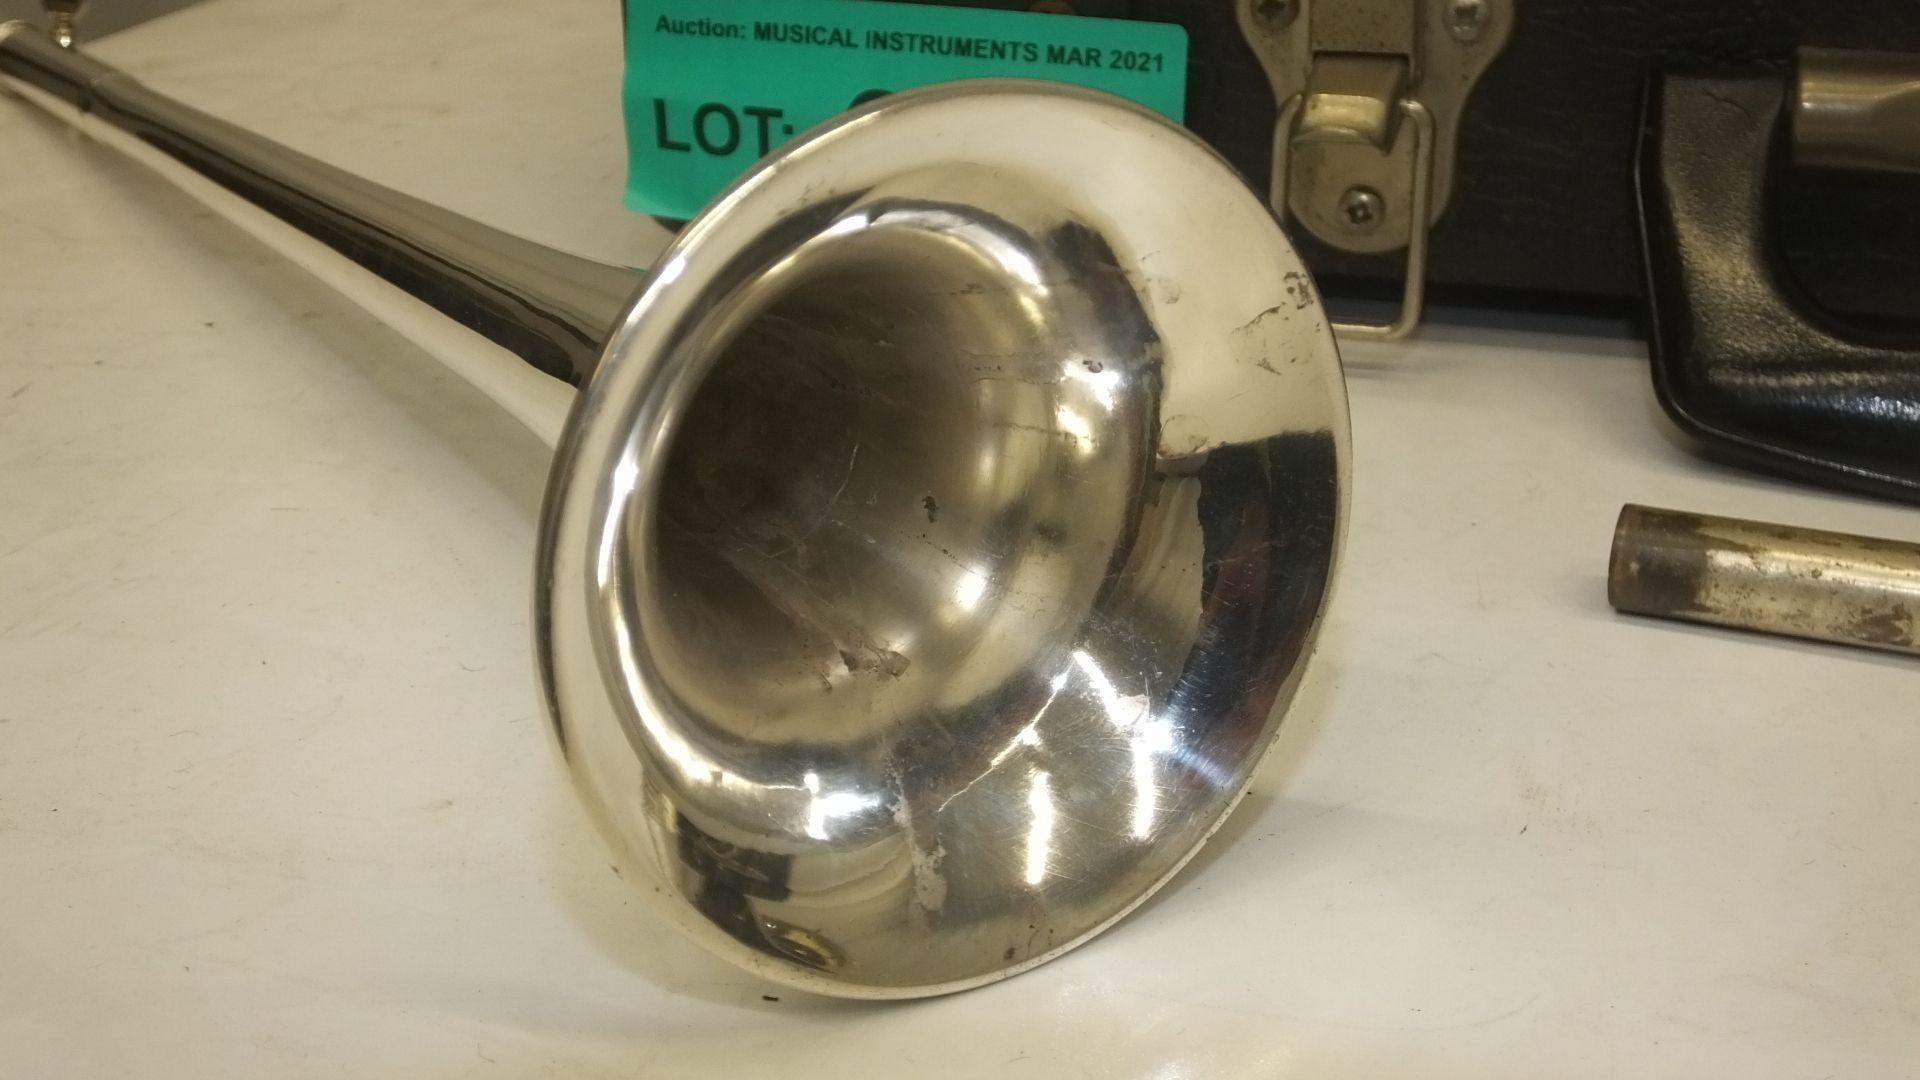 Fanfare Trumpet (incomplete) - Serial Number - 1701 - Image 5 of 7